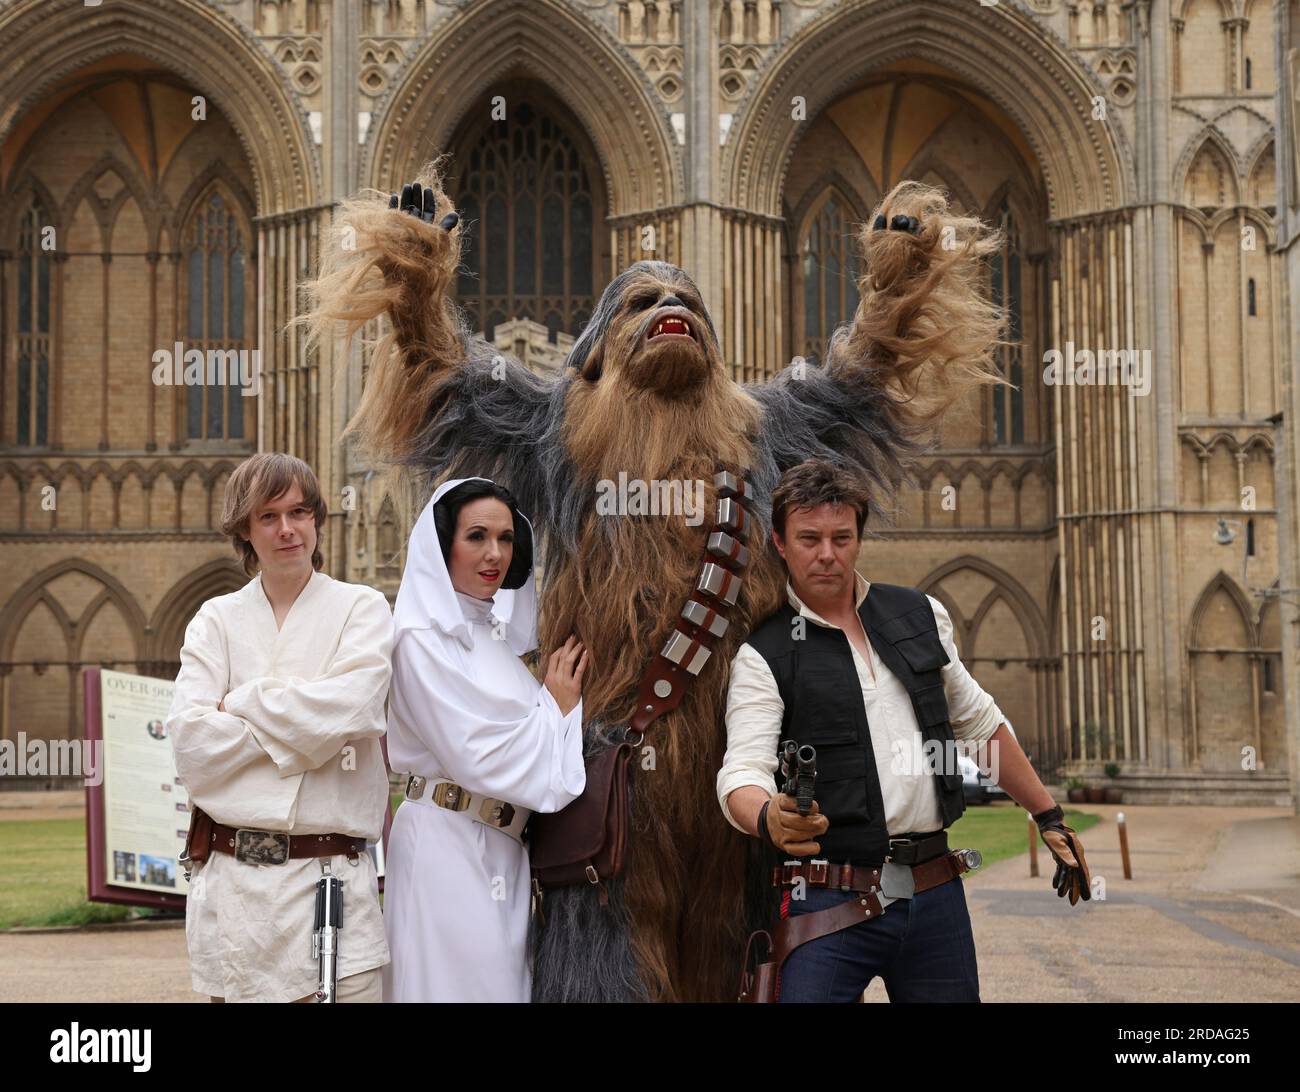 Peterborough, UK. 18th July, 2023. Luke Skywalker, Princess Leia, Chewbacca and Han Solo pose outside Peterborough Cathedral before one of the largest Star Wars private fan collections in the world can be seen in the magnificent Peterborough Cathedral from 19th July. The exhibition, Unofficial Galaxies, at Peterborough Cathedral, includes over 120 exhibits, with a life-sized Land Speeder amongst on show alongside rare Star Wars toys and items. Peterborough, Cambridgeshire, UK. Credit: Paul Marriott/Alamy Live News Stock Photo